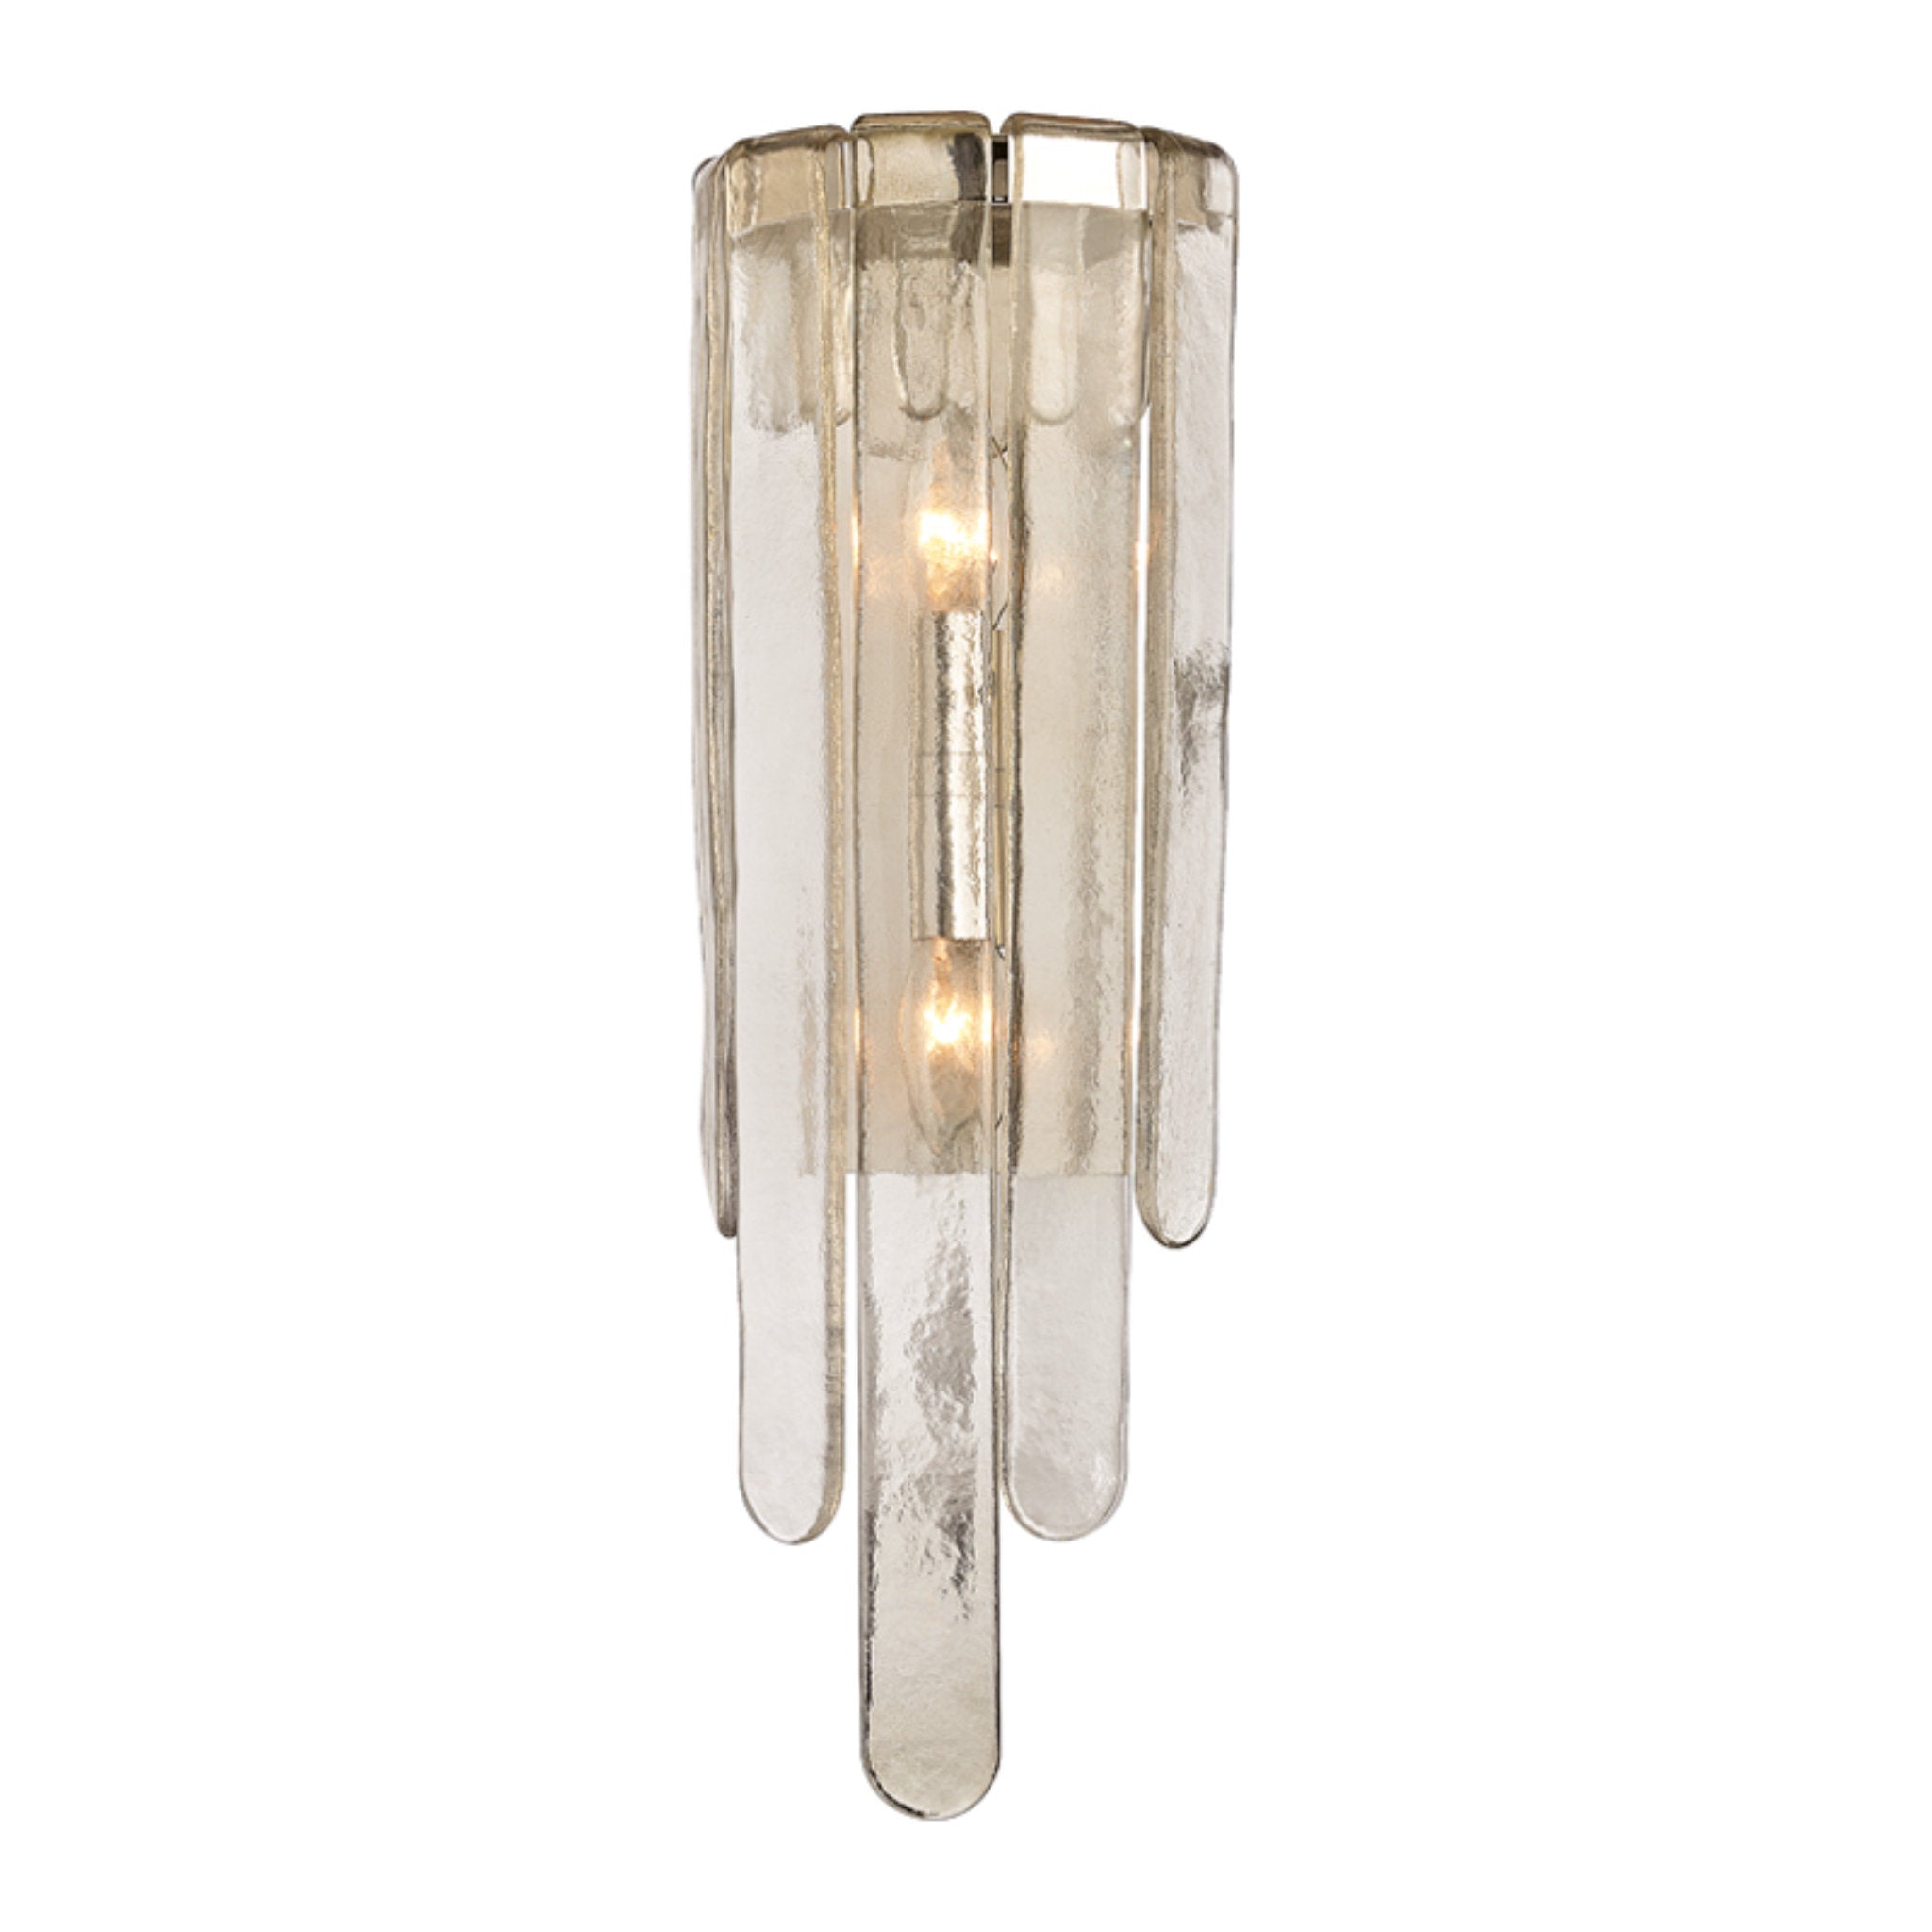 Hudson Valley Lighting 9410-PN Fenwater 2 Light Wall Sconce in Polished Nickel Open Box